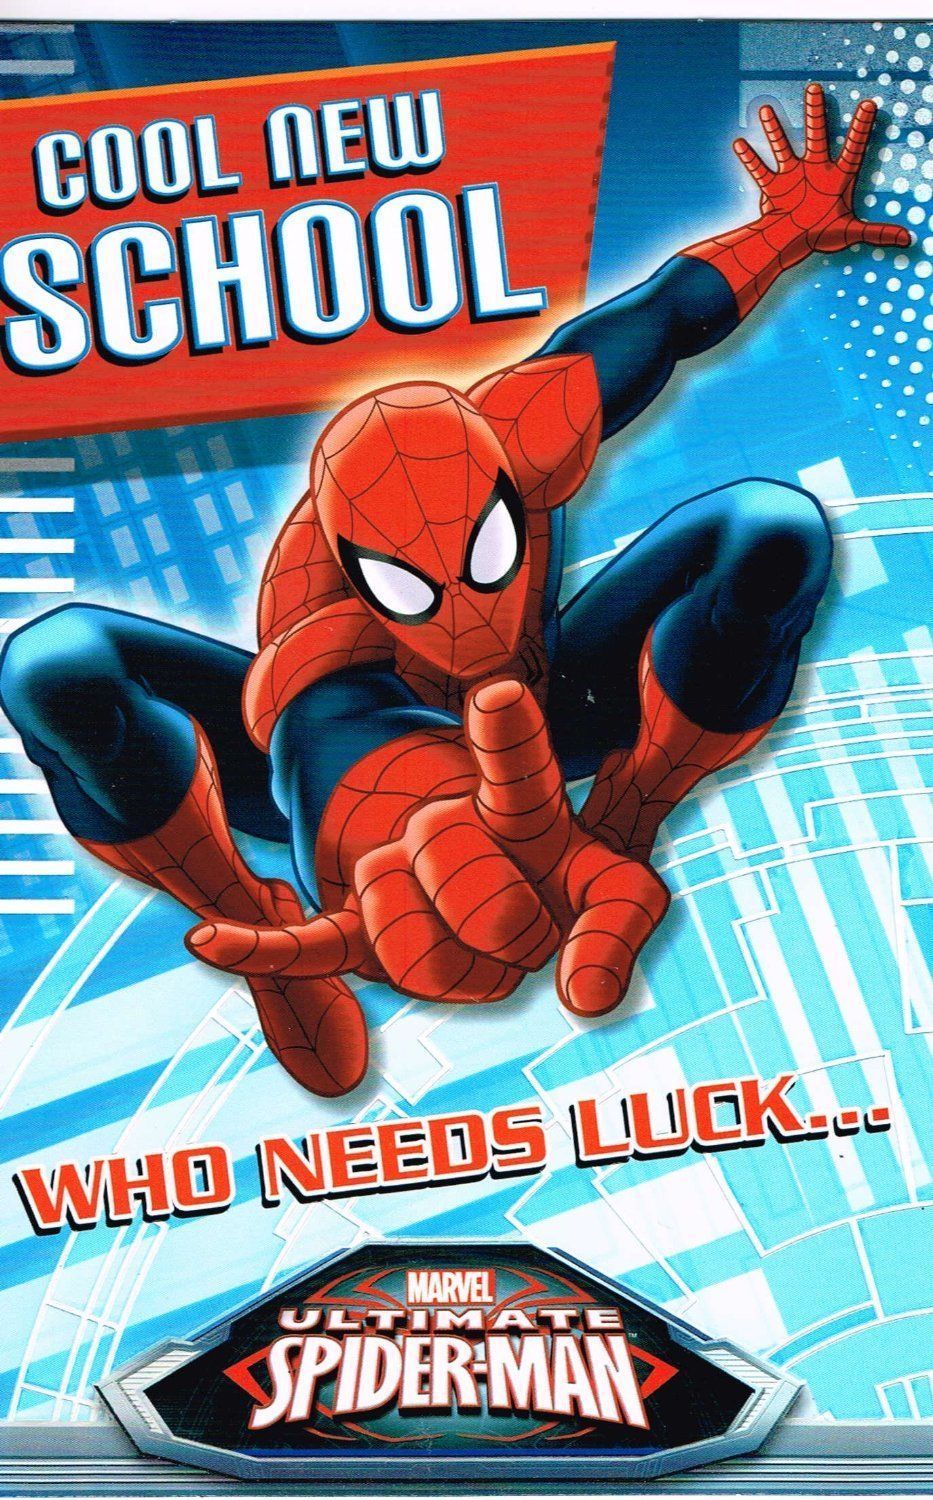 ultimate spiderman cool new school who needs luck... card 